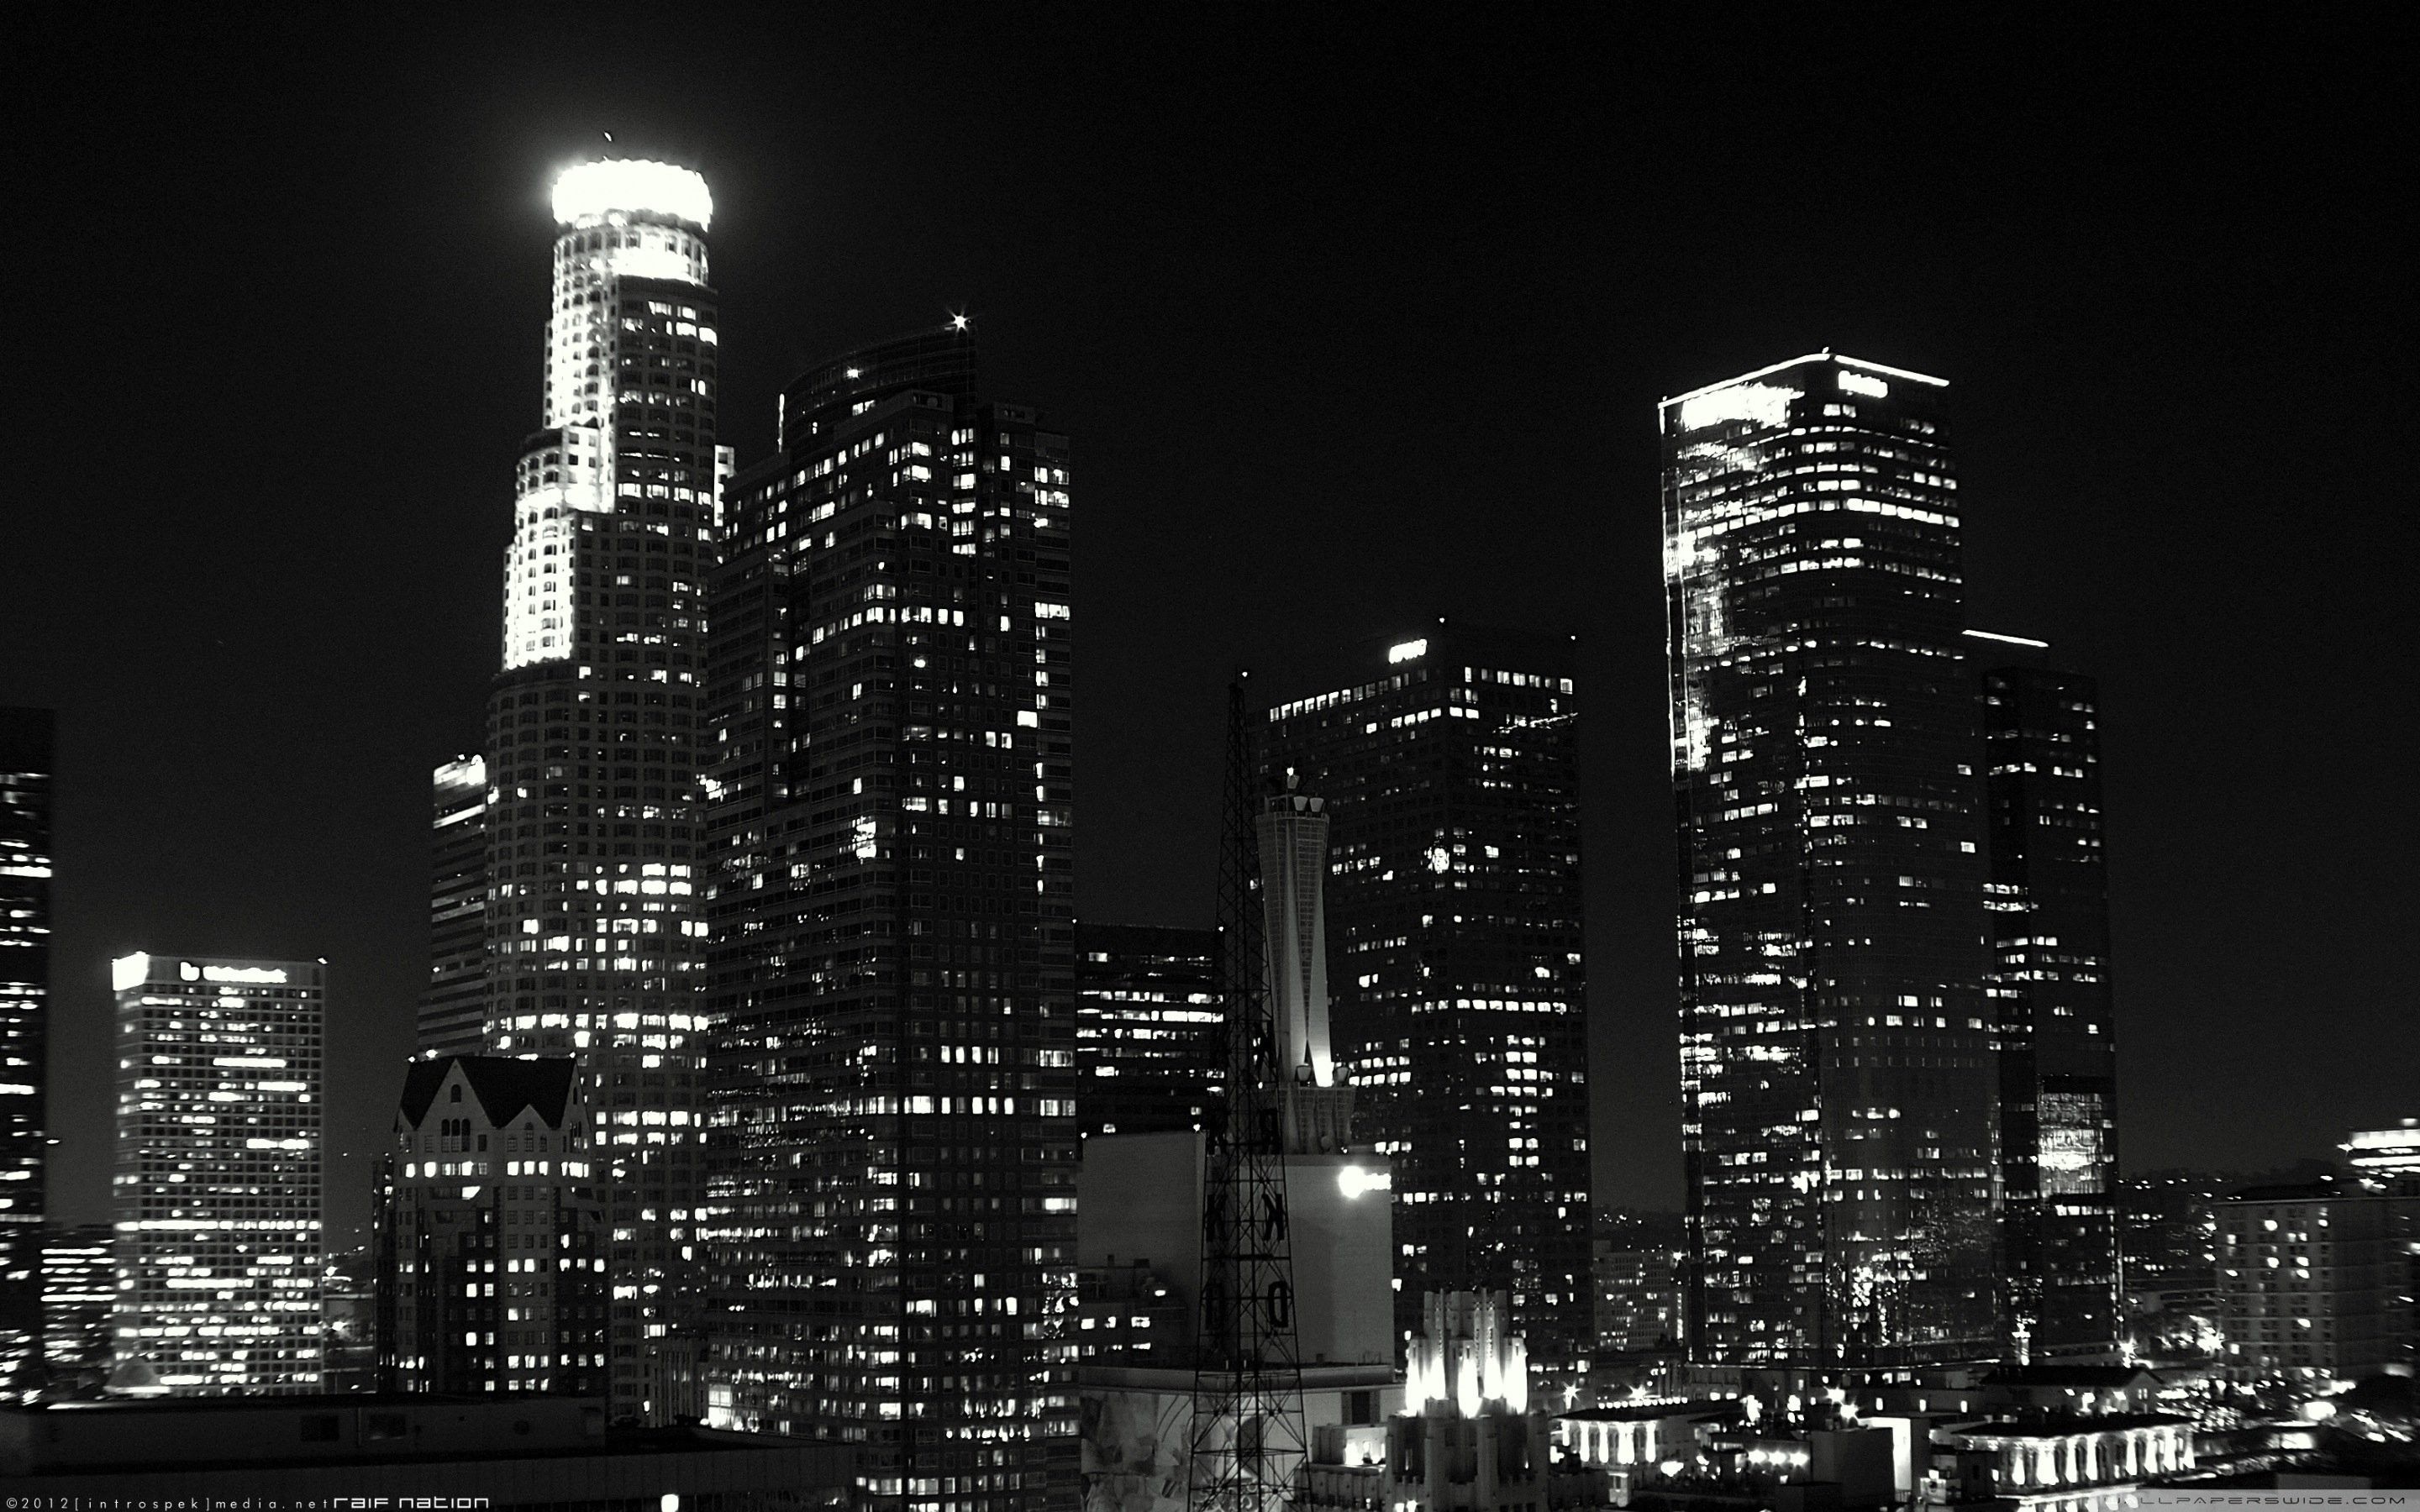 A black and white photo of the Los Angeles skyline at night. - Los Angeles